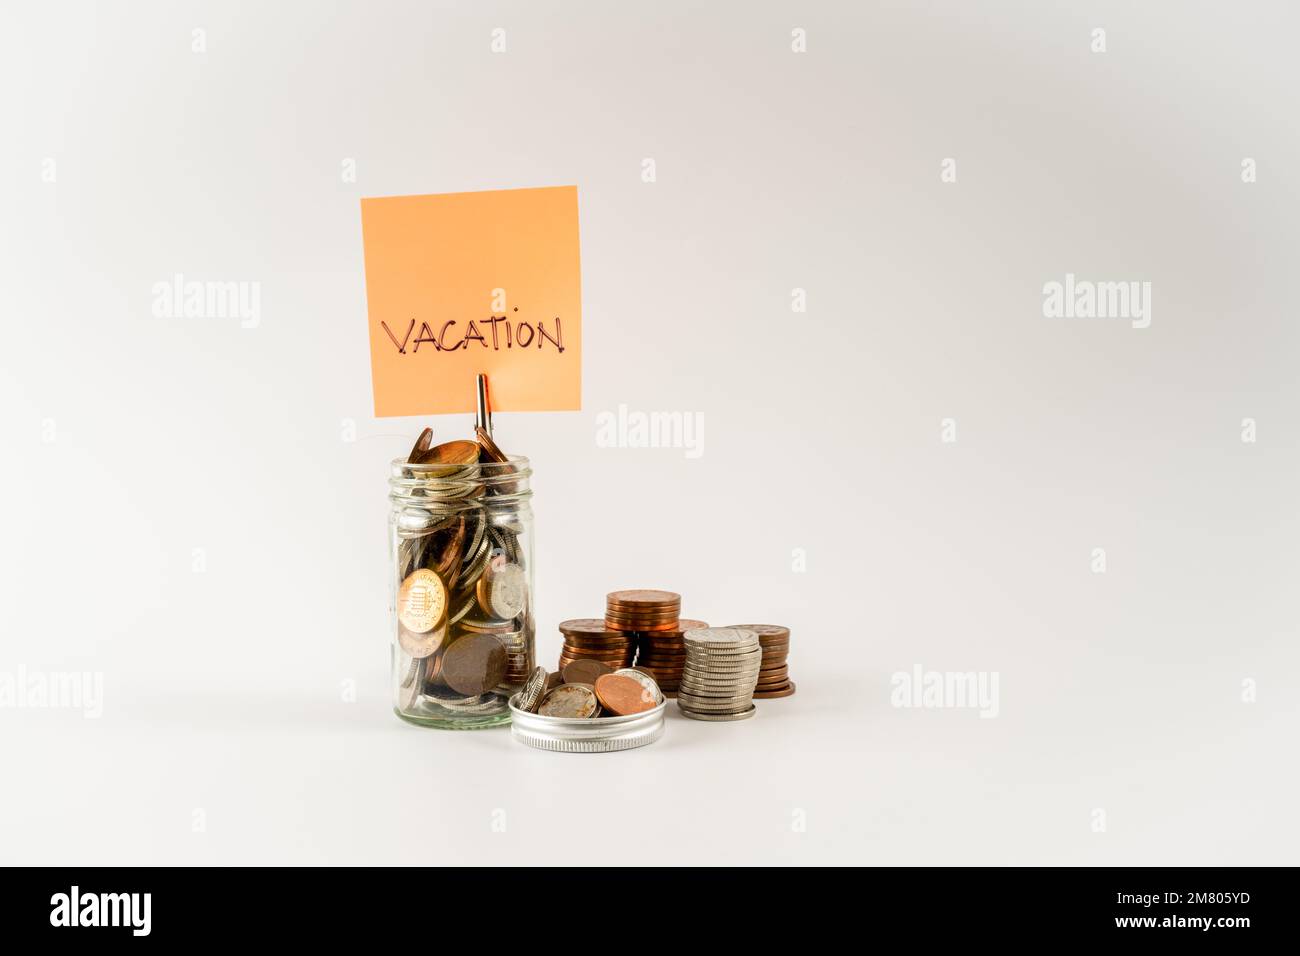 Vacation savings budget fund jar concept isolated on a white background Stock Photo